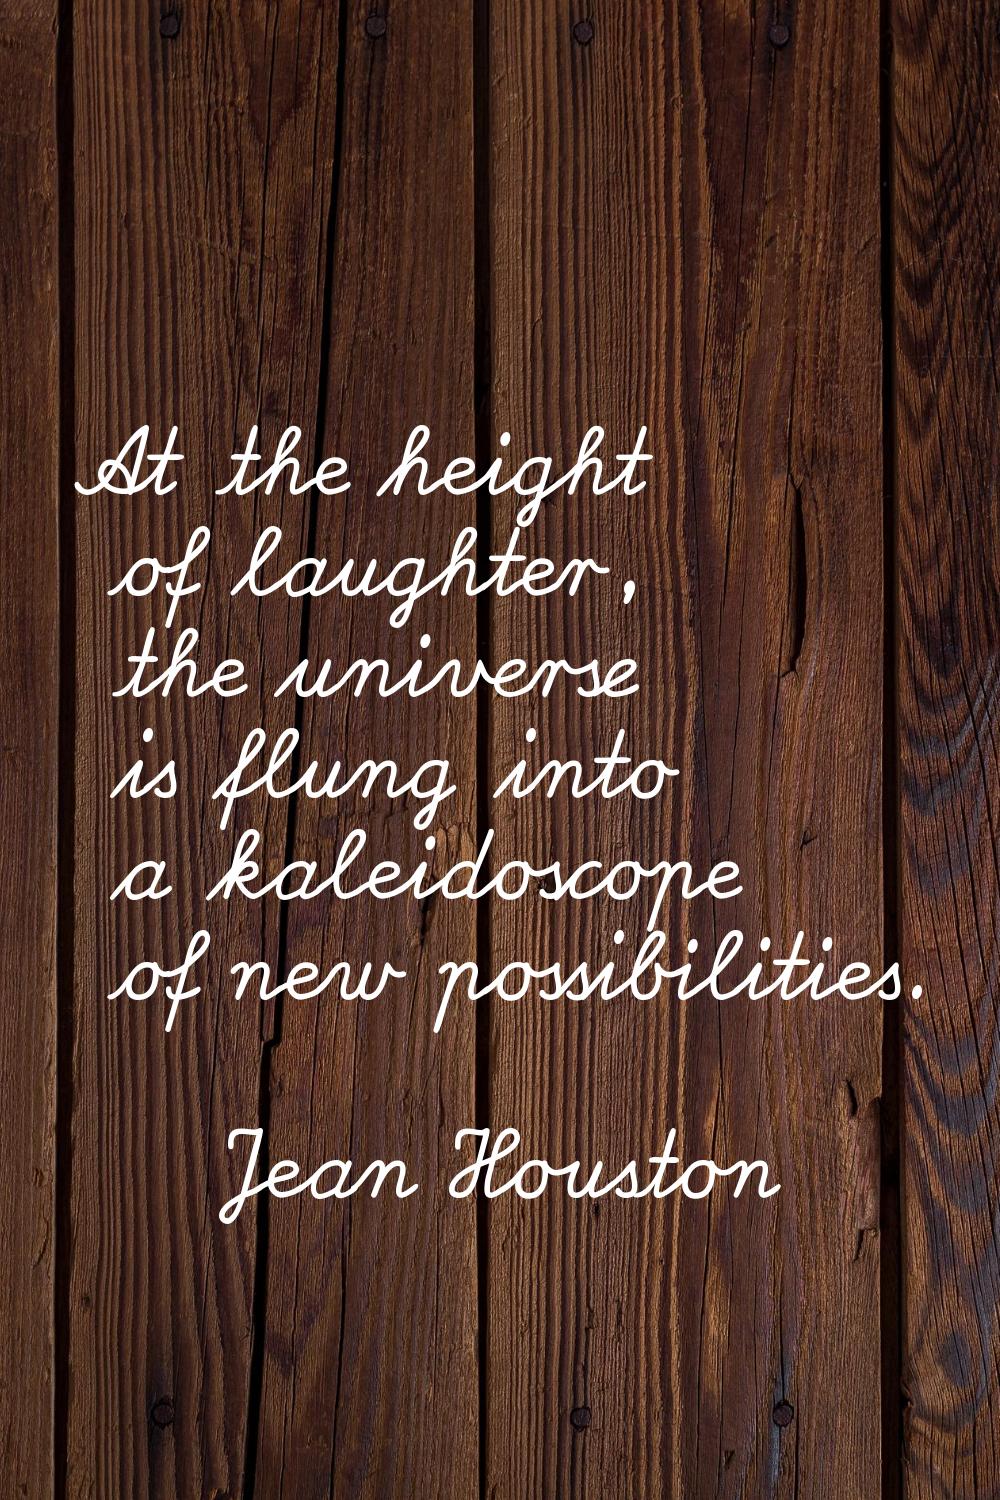 At the height of laughter, the universe is flung into a kaleidoscope of new possibilities.